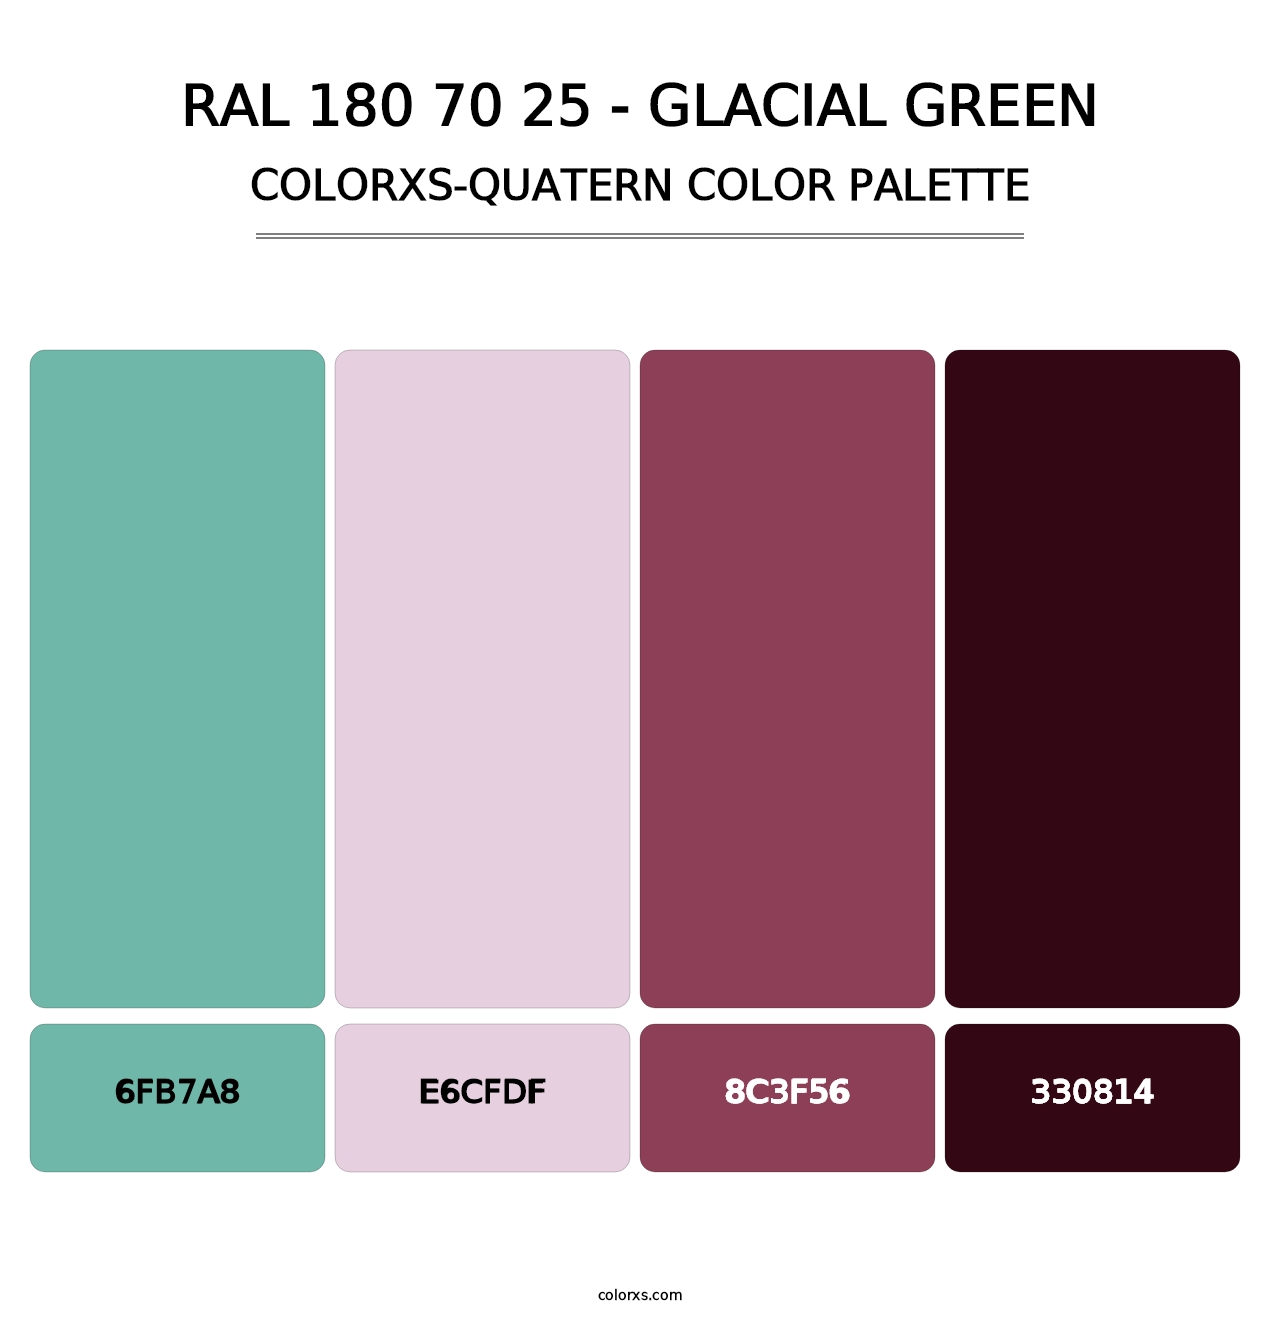 RAL 180 70 25 - Glacial Green - Colorxs Quatern Palette